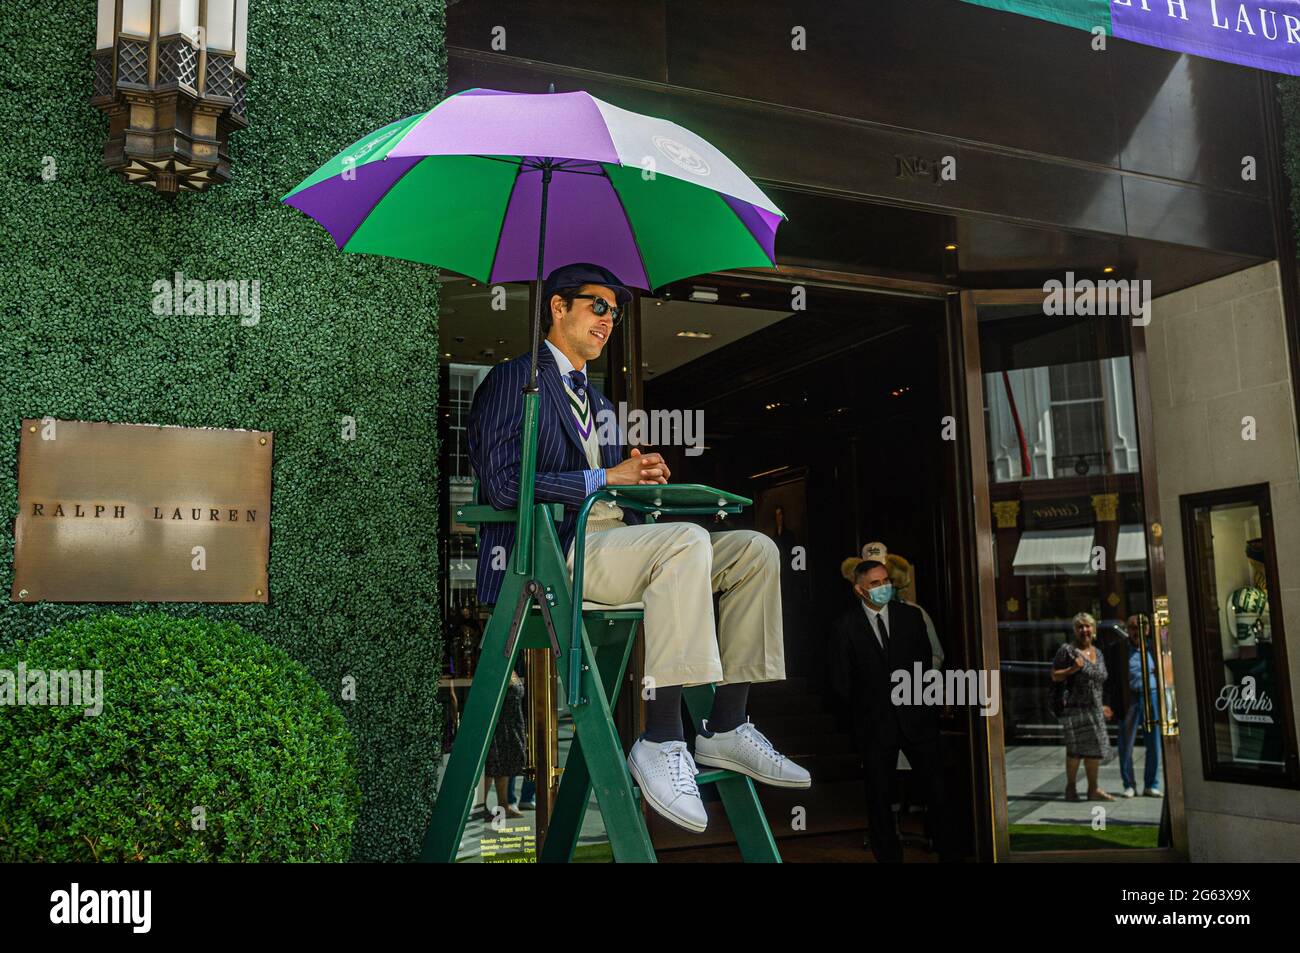 NEW BOND STREET PALACE LONDON 2 July 2021. A staff member dressed as an  umpire outfit sits outside the Ralph Lauren store in New Bond Street  decorated for the 2021 Wimbledon tennis